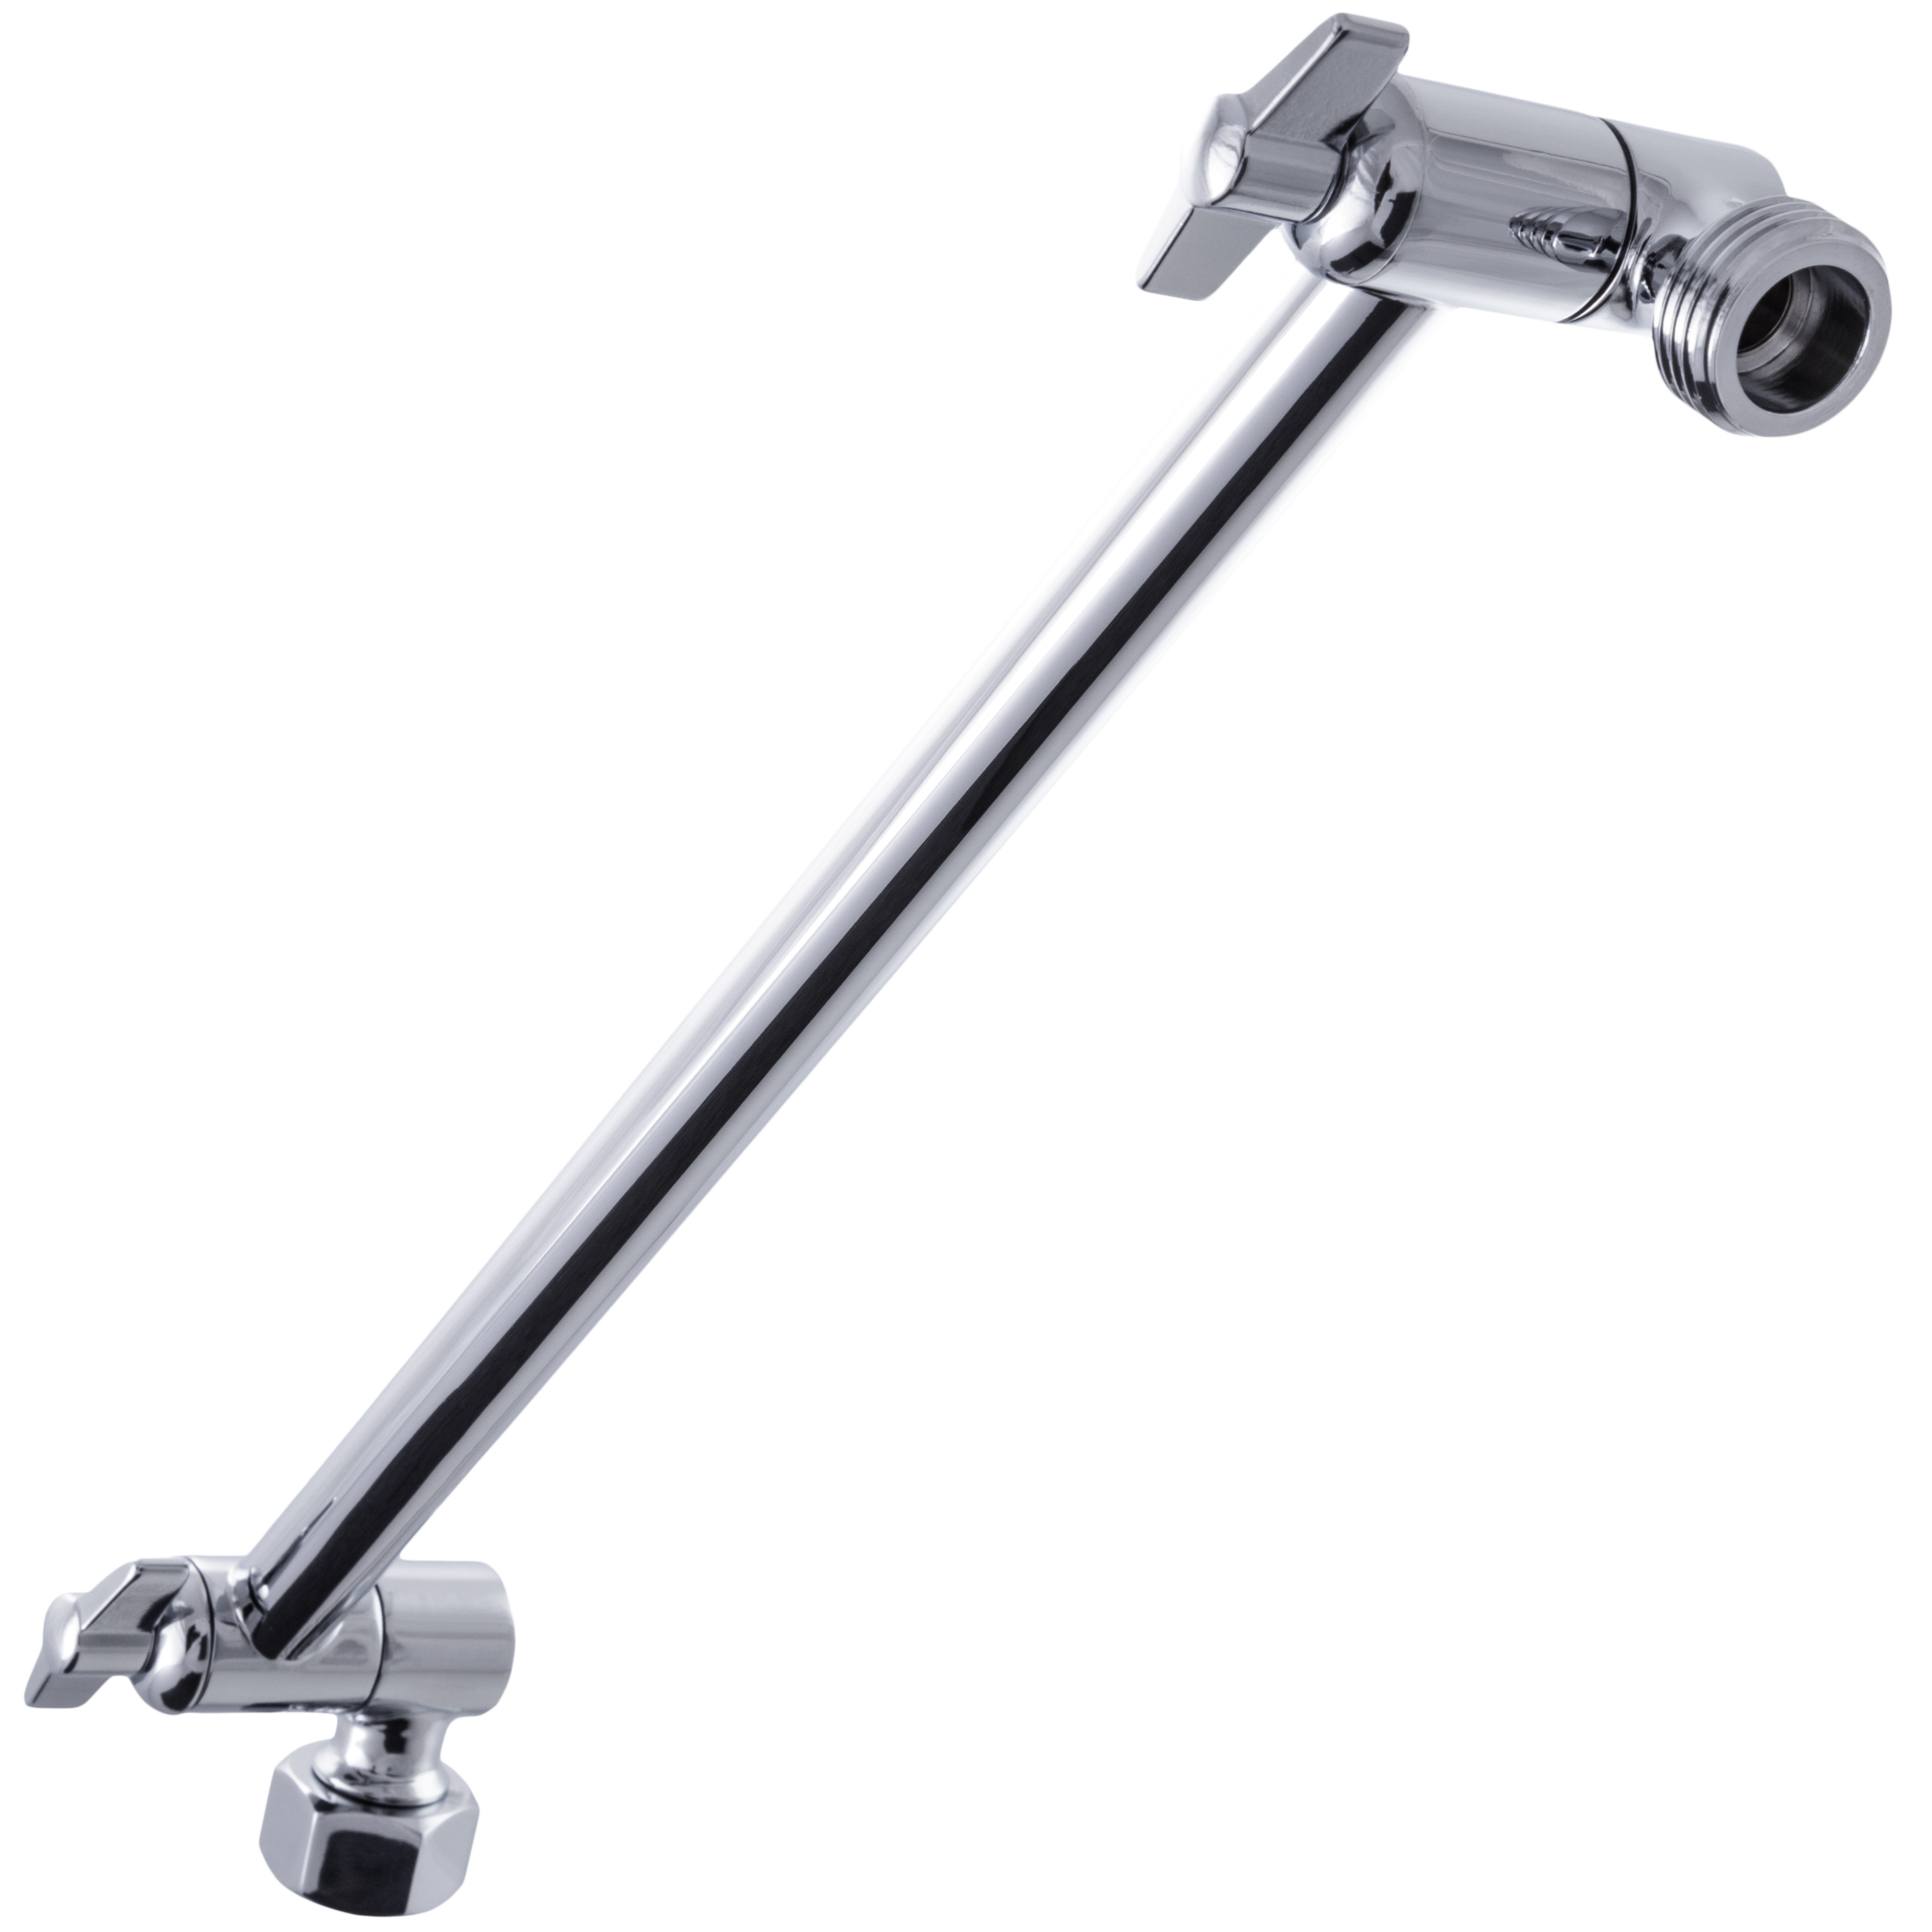 Hotel Spa 11" Solid Brass Adjustable Shower Extension Arm with Lock Joints Lowe 